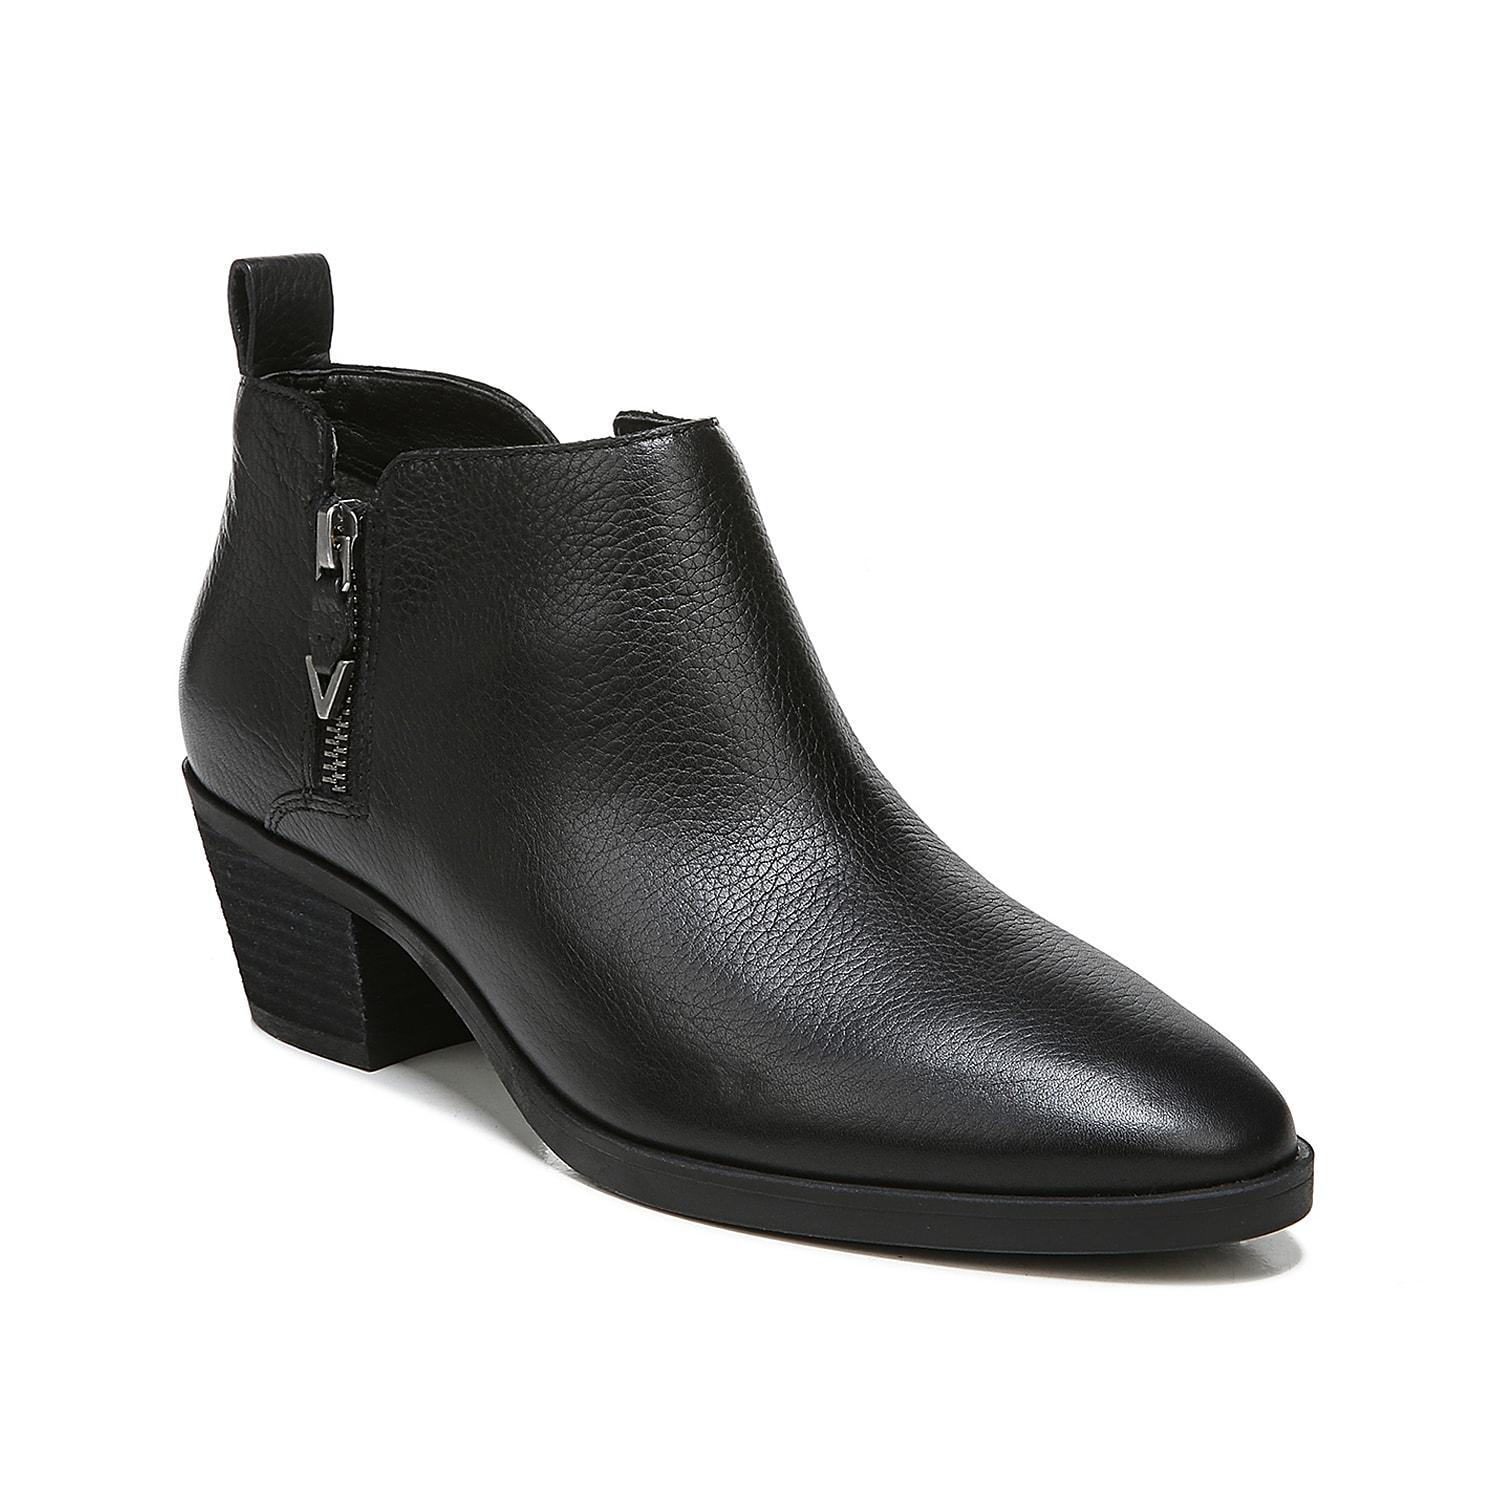 Vionic Cecily Bootie Product Image